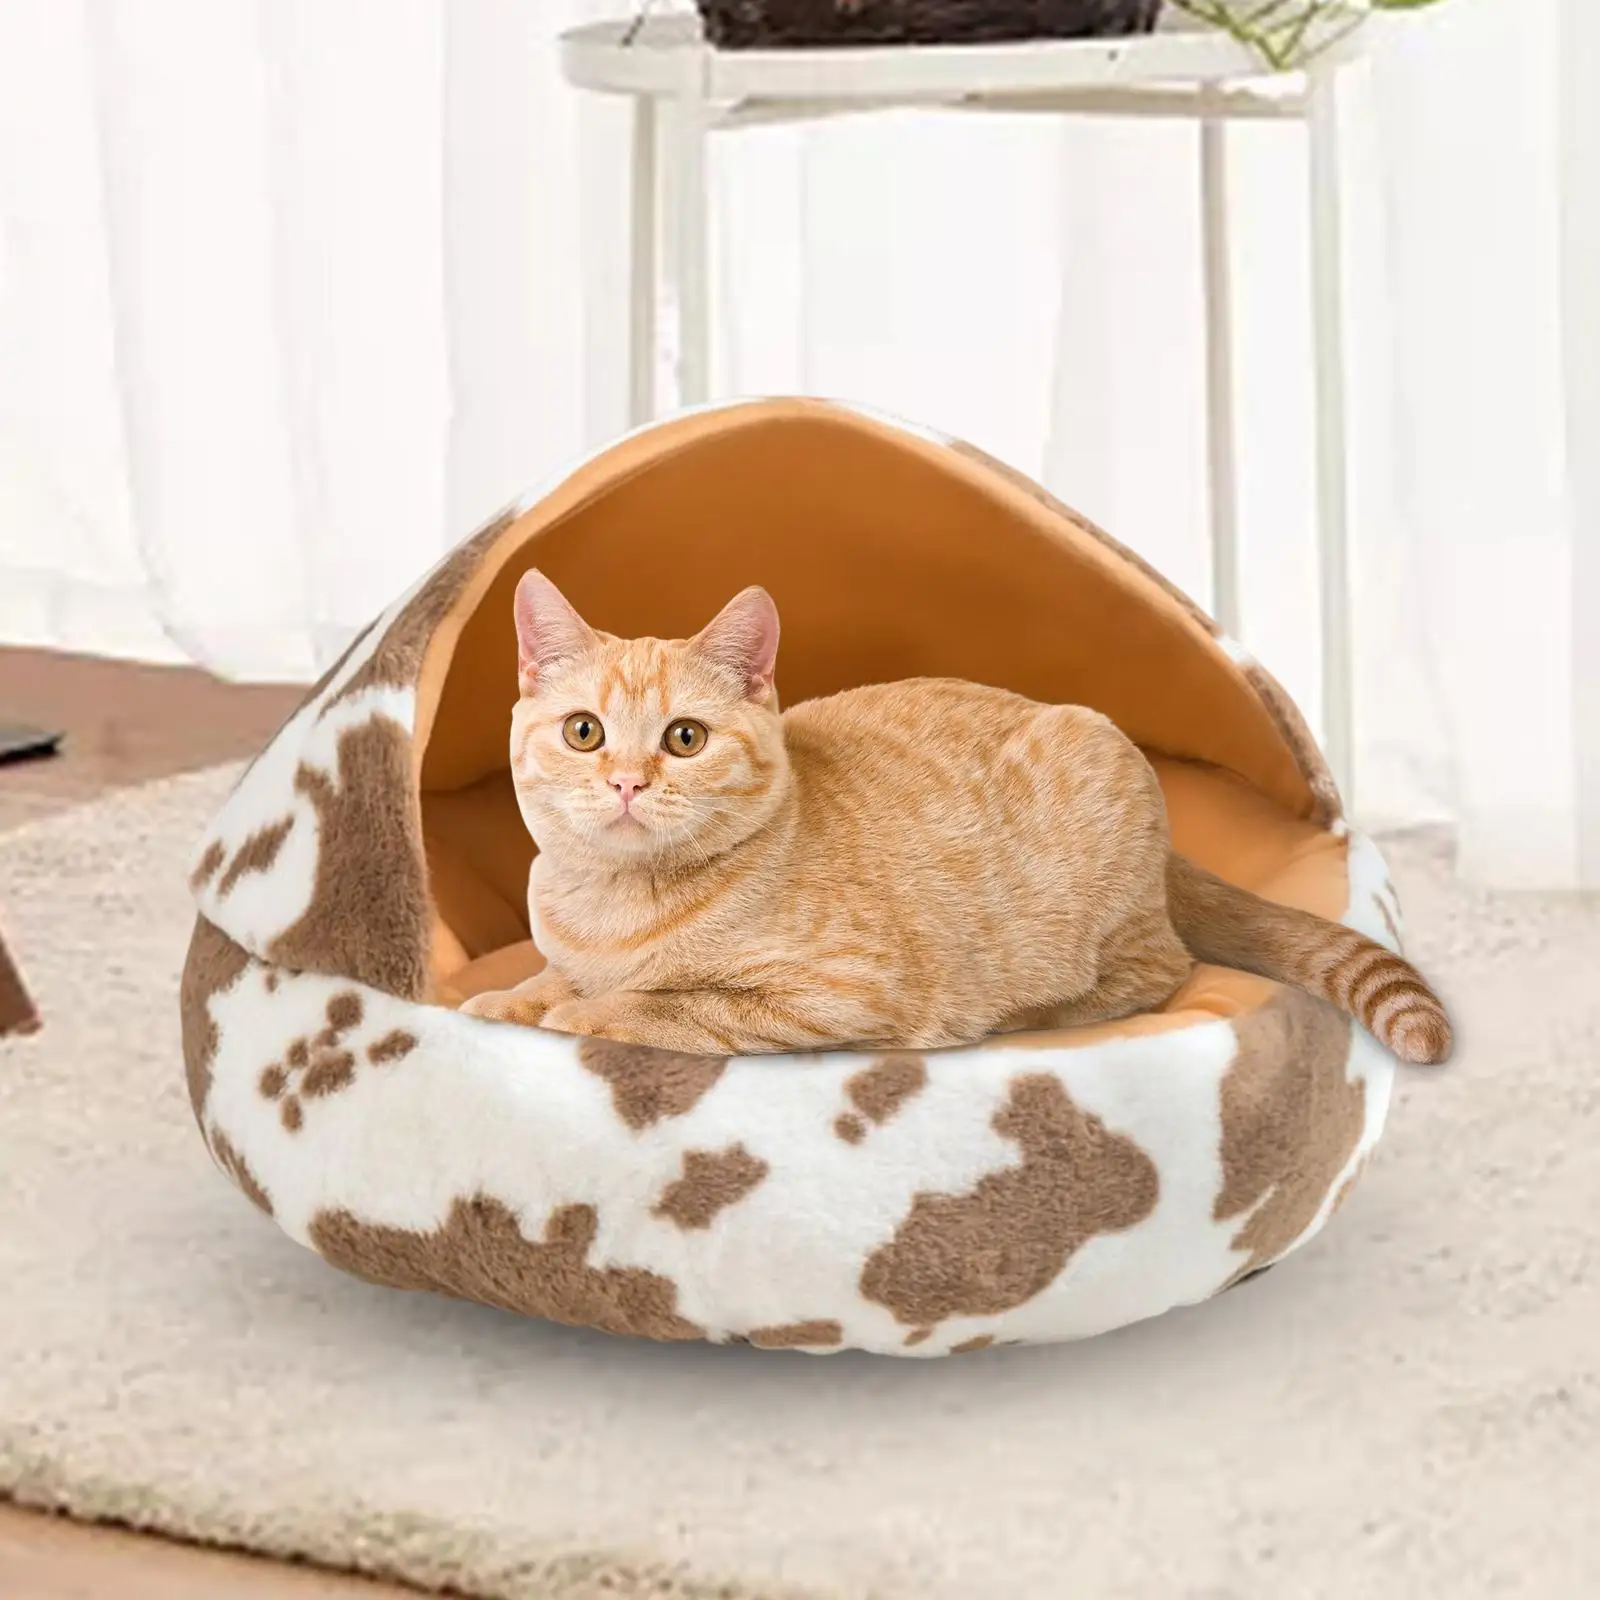 Cave Cat Bed Dog Tent Self Warming Hand or Machine Washable Warm Pet House for Small Medium Dog Kitty